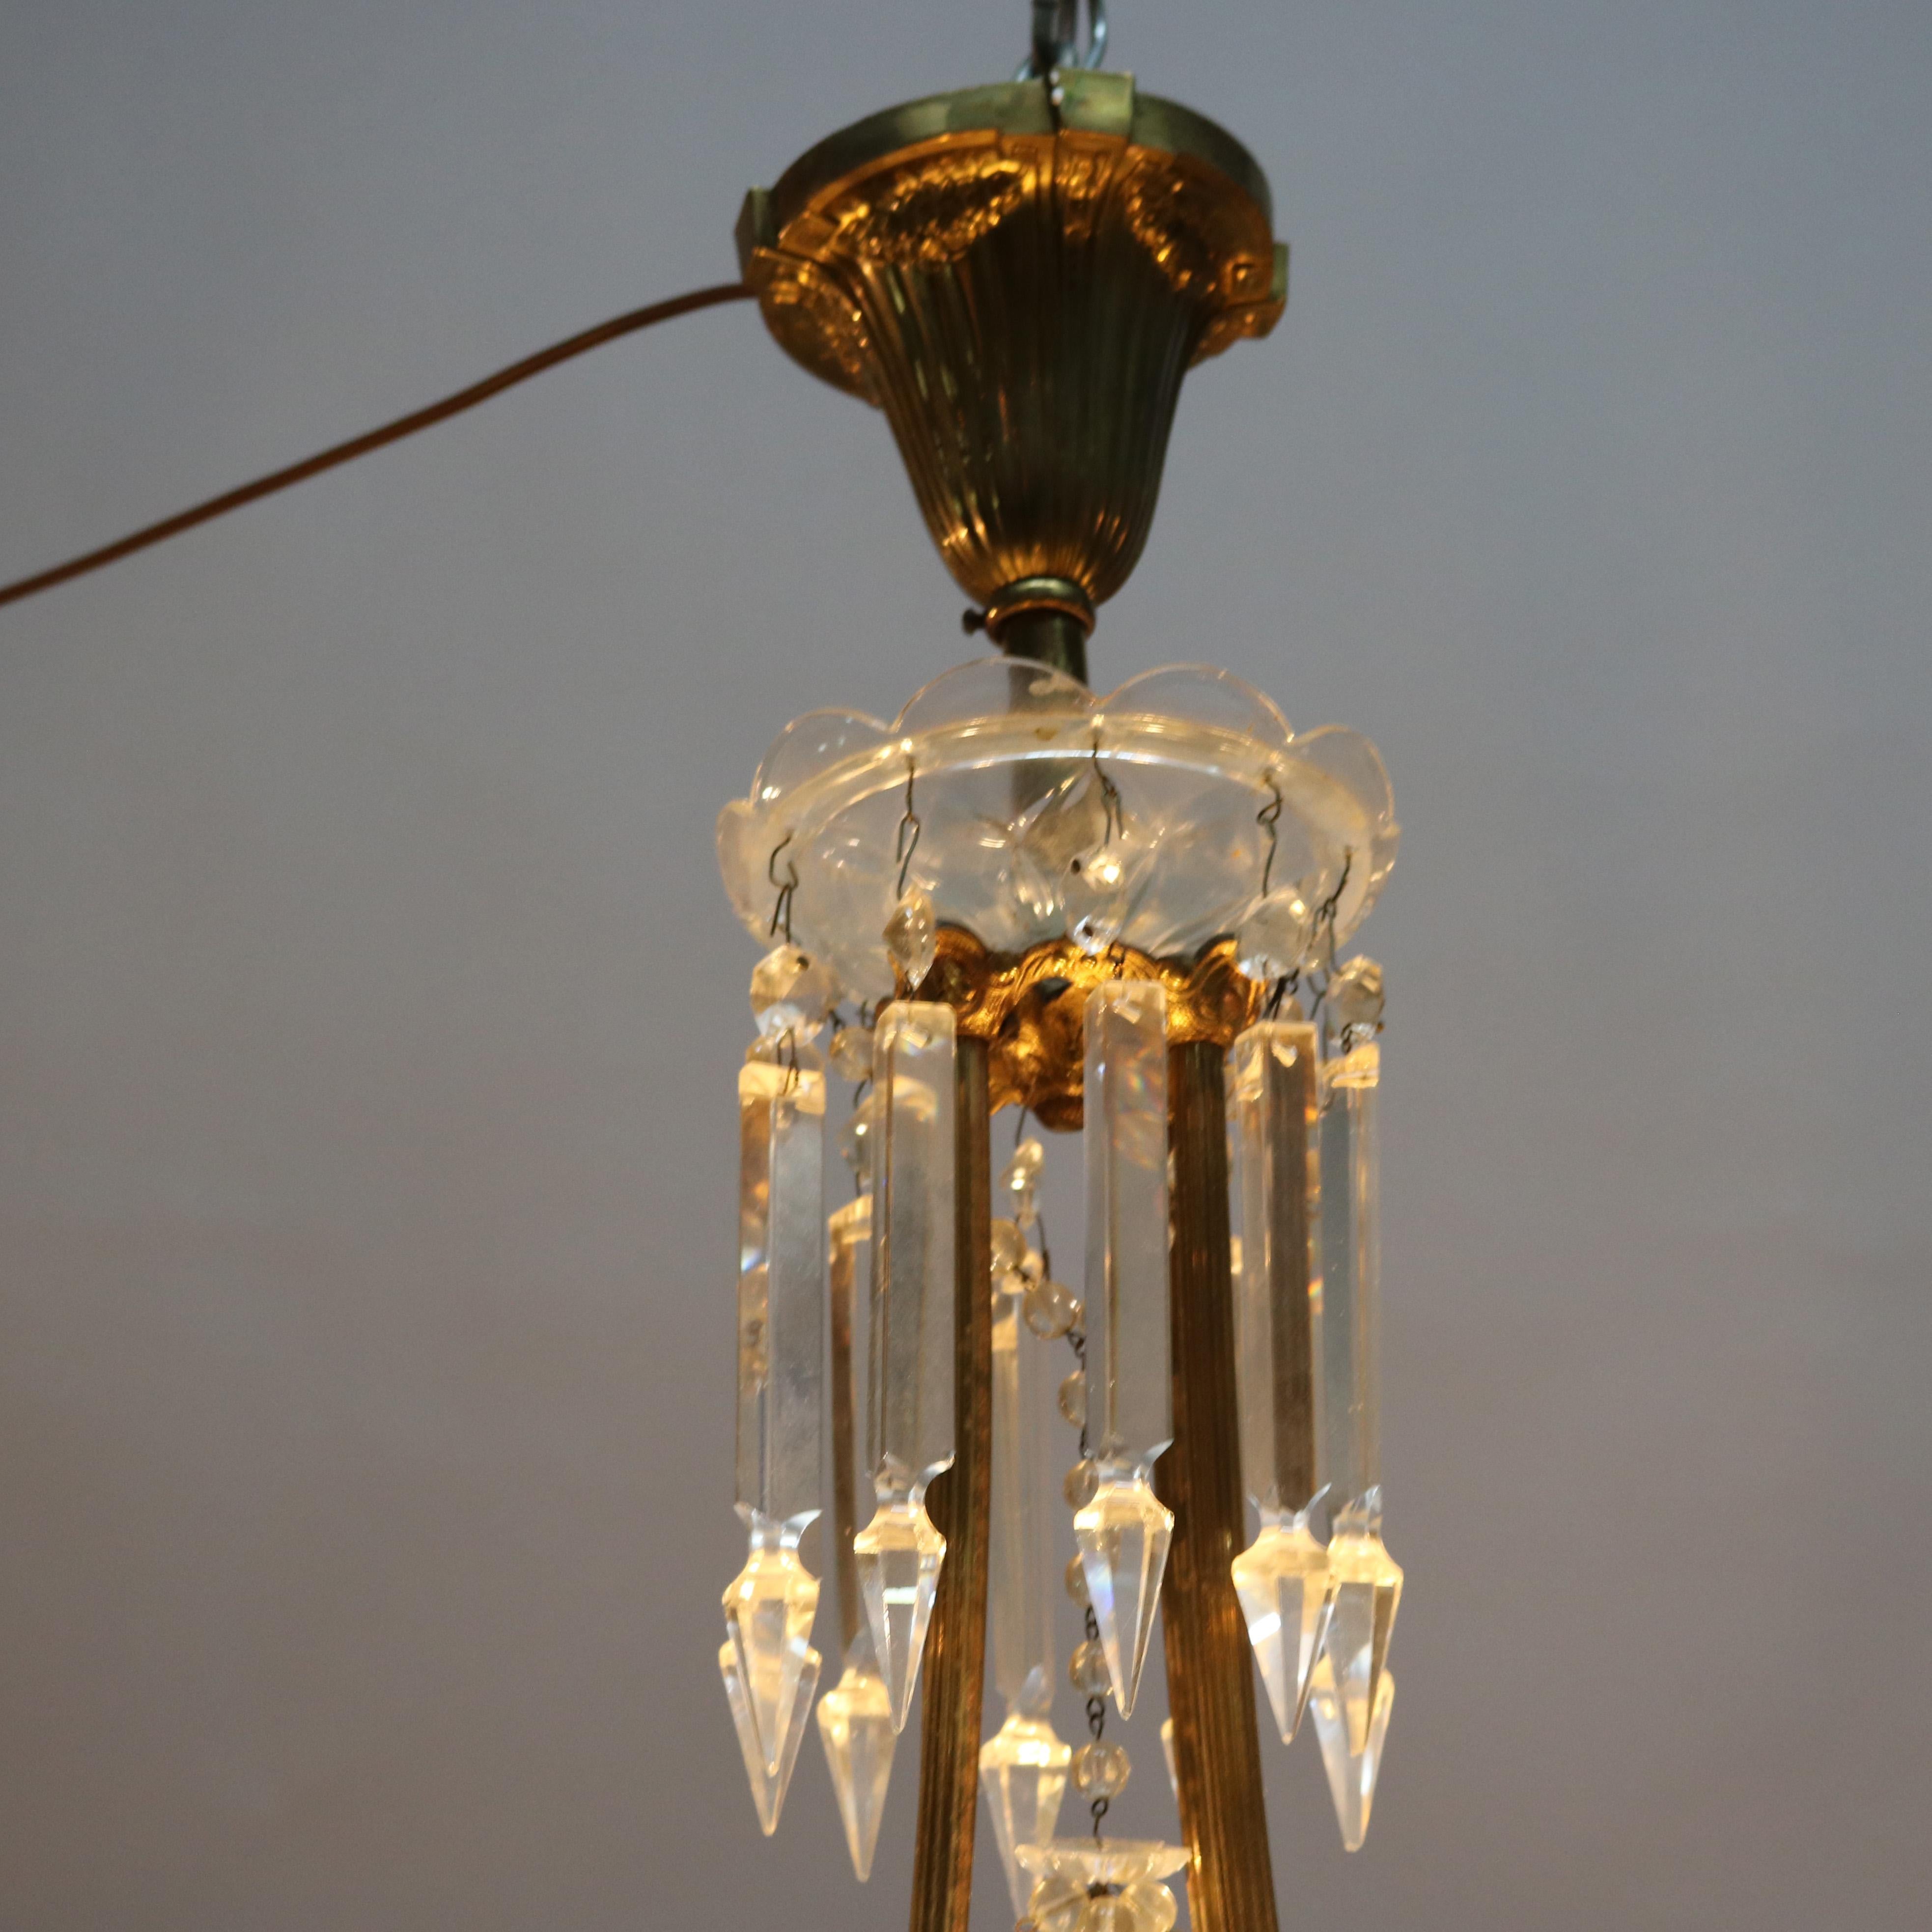 Antique French Style Bronzed Four-Light Chandelier with Draped Crystals, c1920 For Sale 1